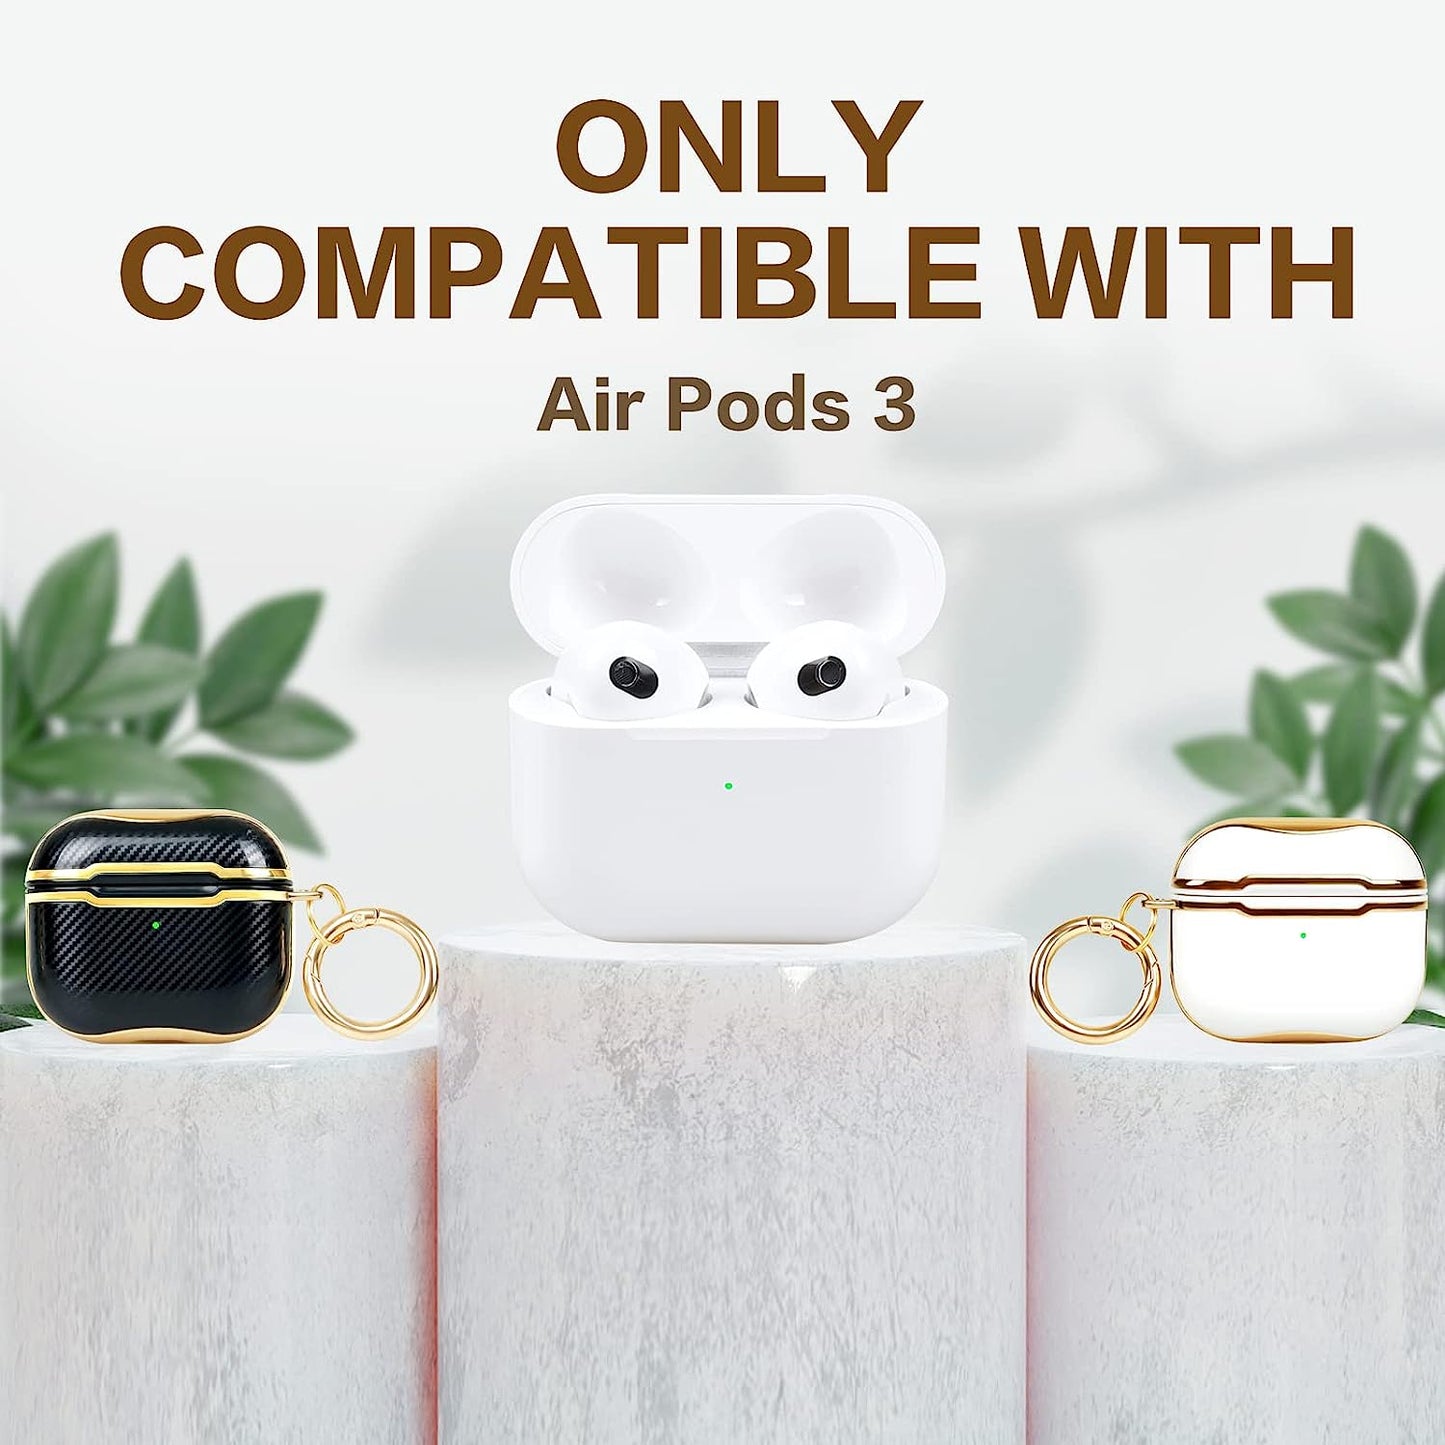 New 2022 New AirPods 3rd Generation Case, Full Body Protective Hard Cover with Fashion Design for AirPods 3rd Generation Charging Case (White)